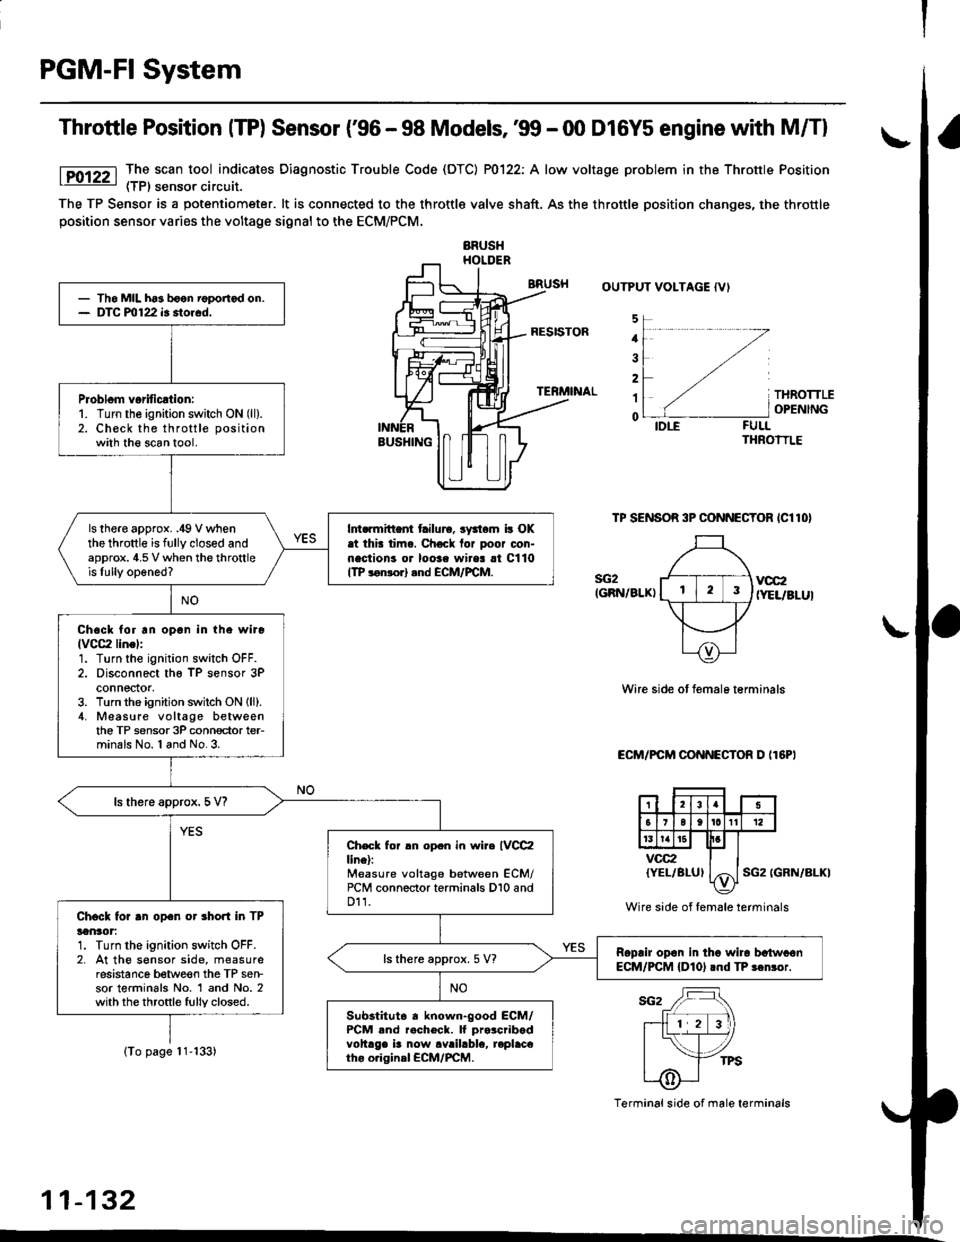 HONDA CIVIC 1996 6.G Workshop Manual PGM-FI System
Throttle Position ITP) Sensor (96 - 98 Models,99 - 00 D16Y5 engine with M/Tl
The scan tool indicates Diagnostic Trouble Code (DTC) P0122: A low voltage problem in the Throttle Position